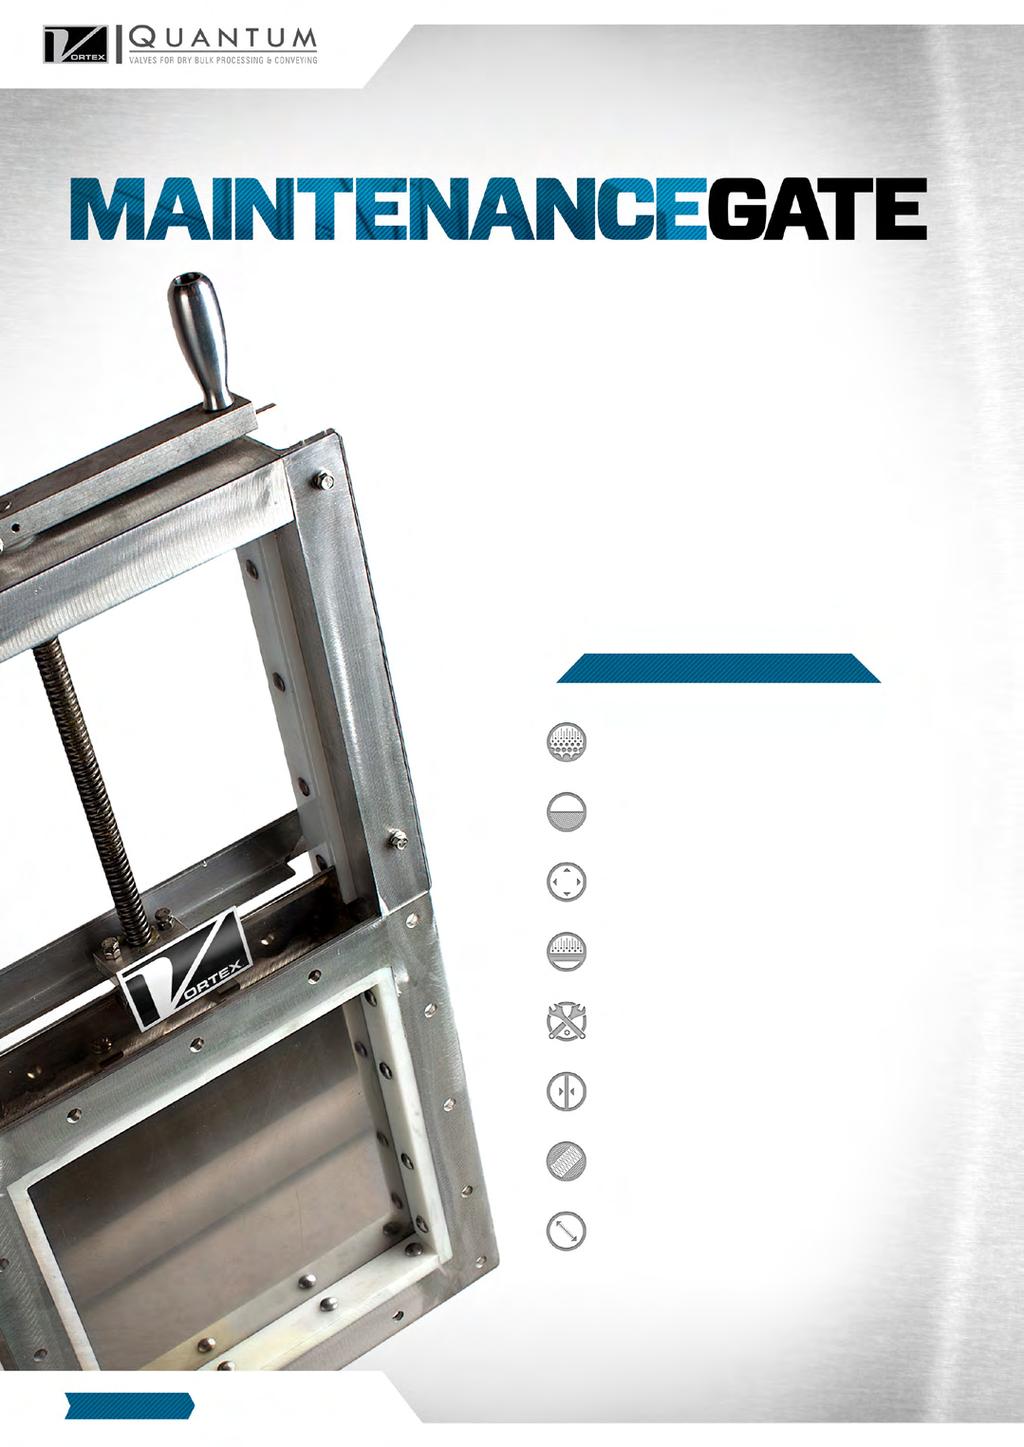 The Vortex Maintenance Gate is designed to shut off material from a hopper or silo when maintenance of downstream equipment is required.